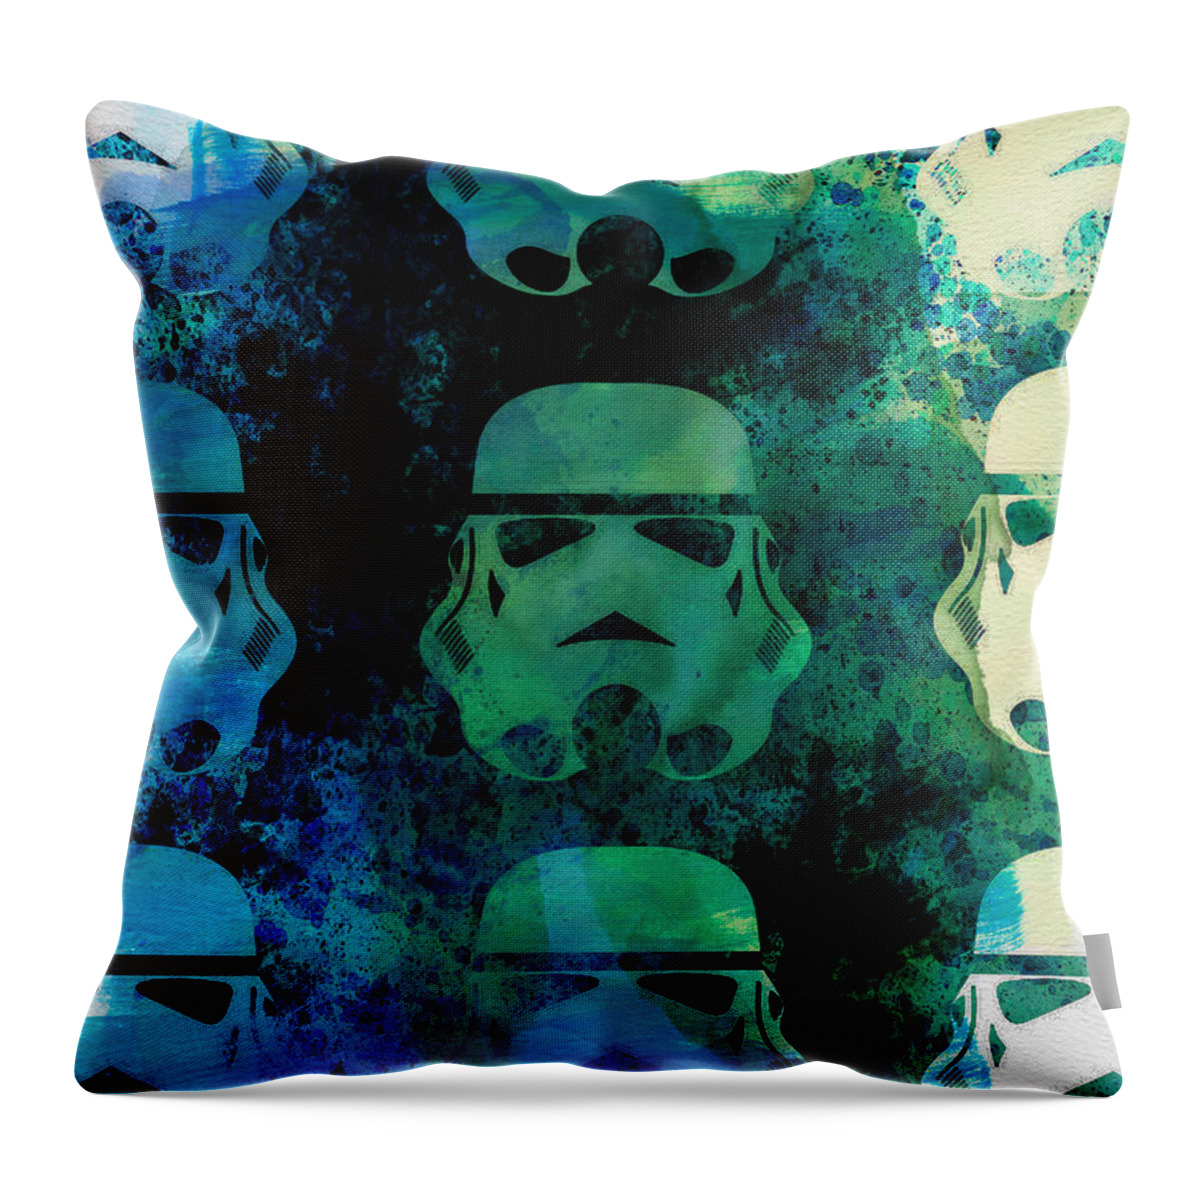 Star Throw Pillow featuring the painting Star Warriors Watercolor 1 by Naxart Studio